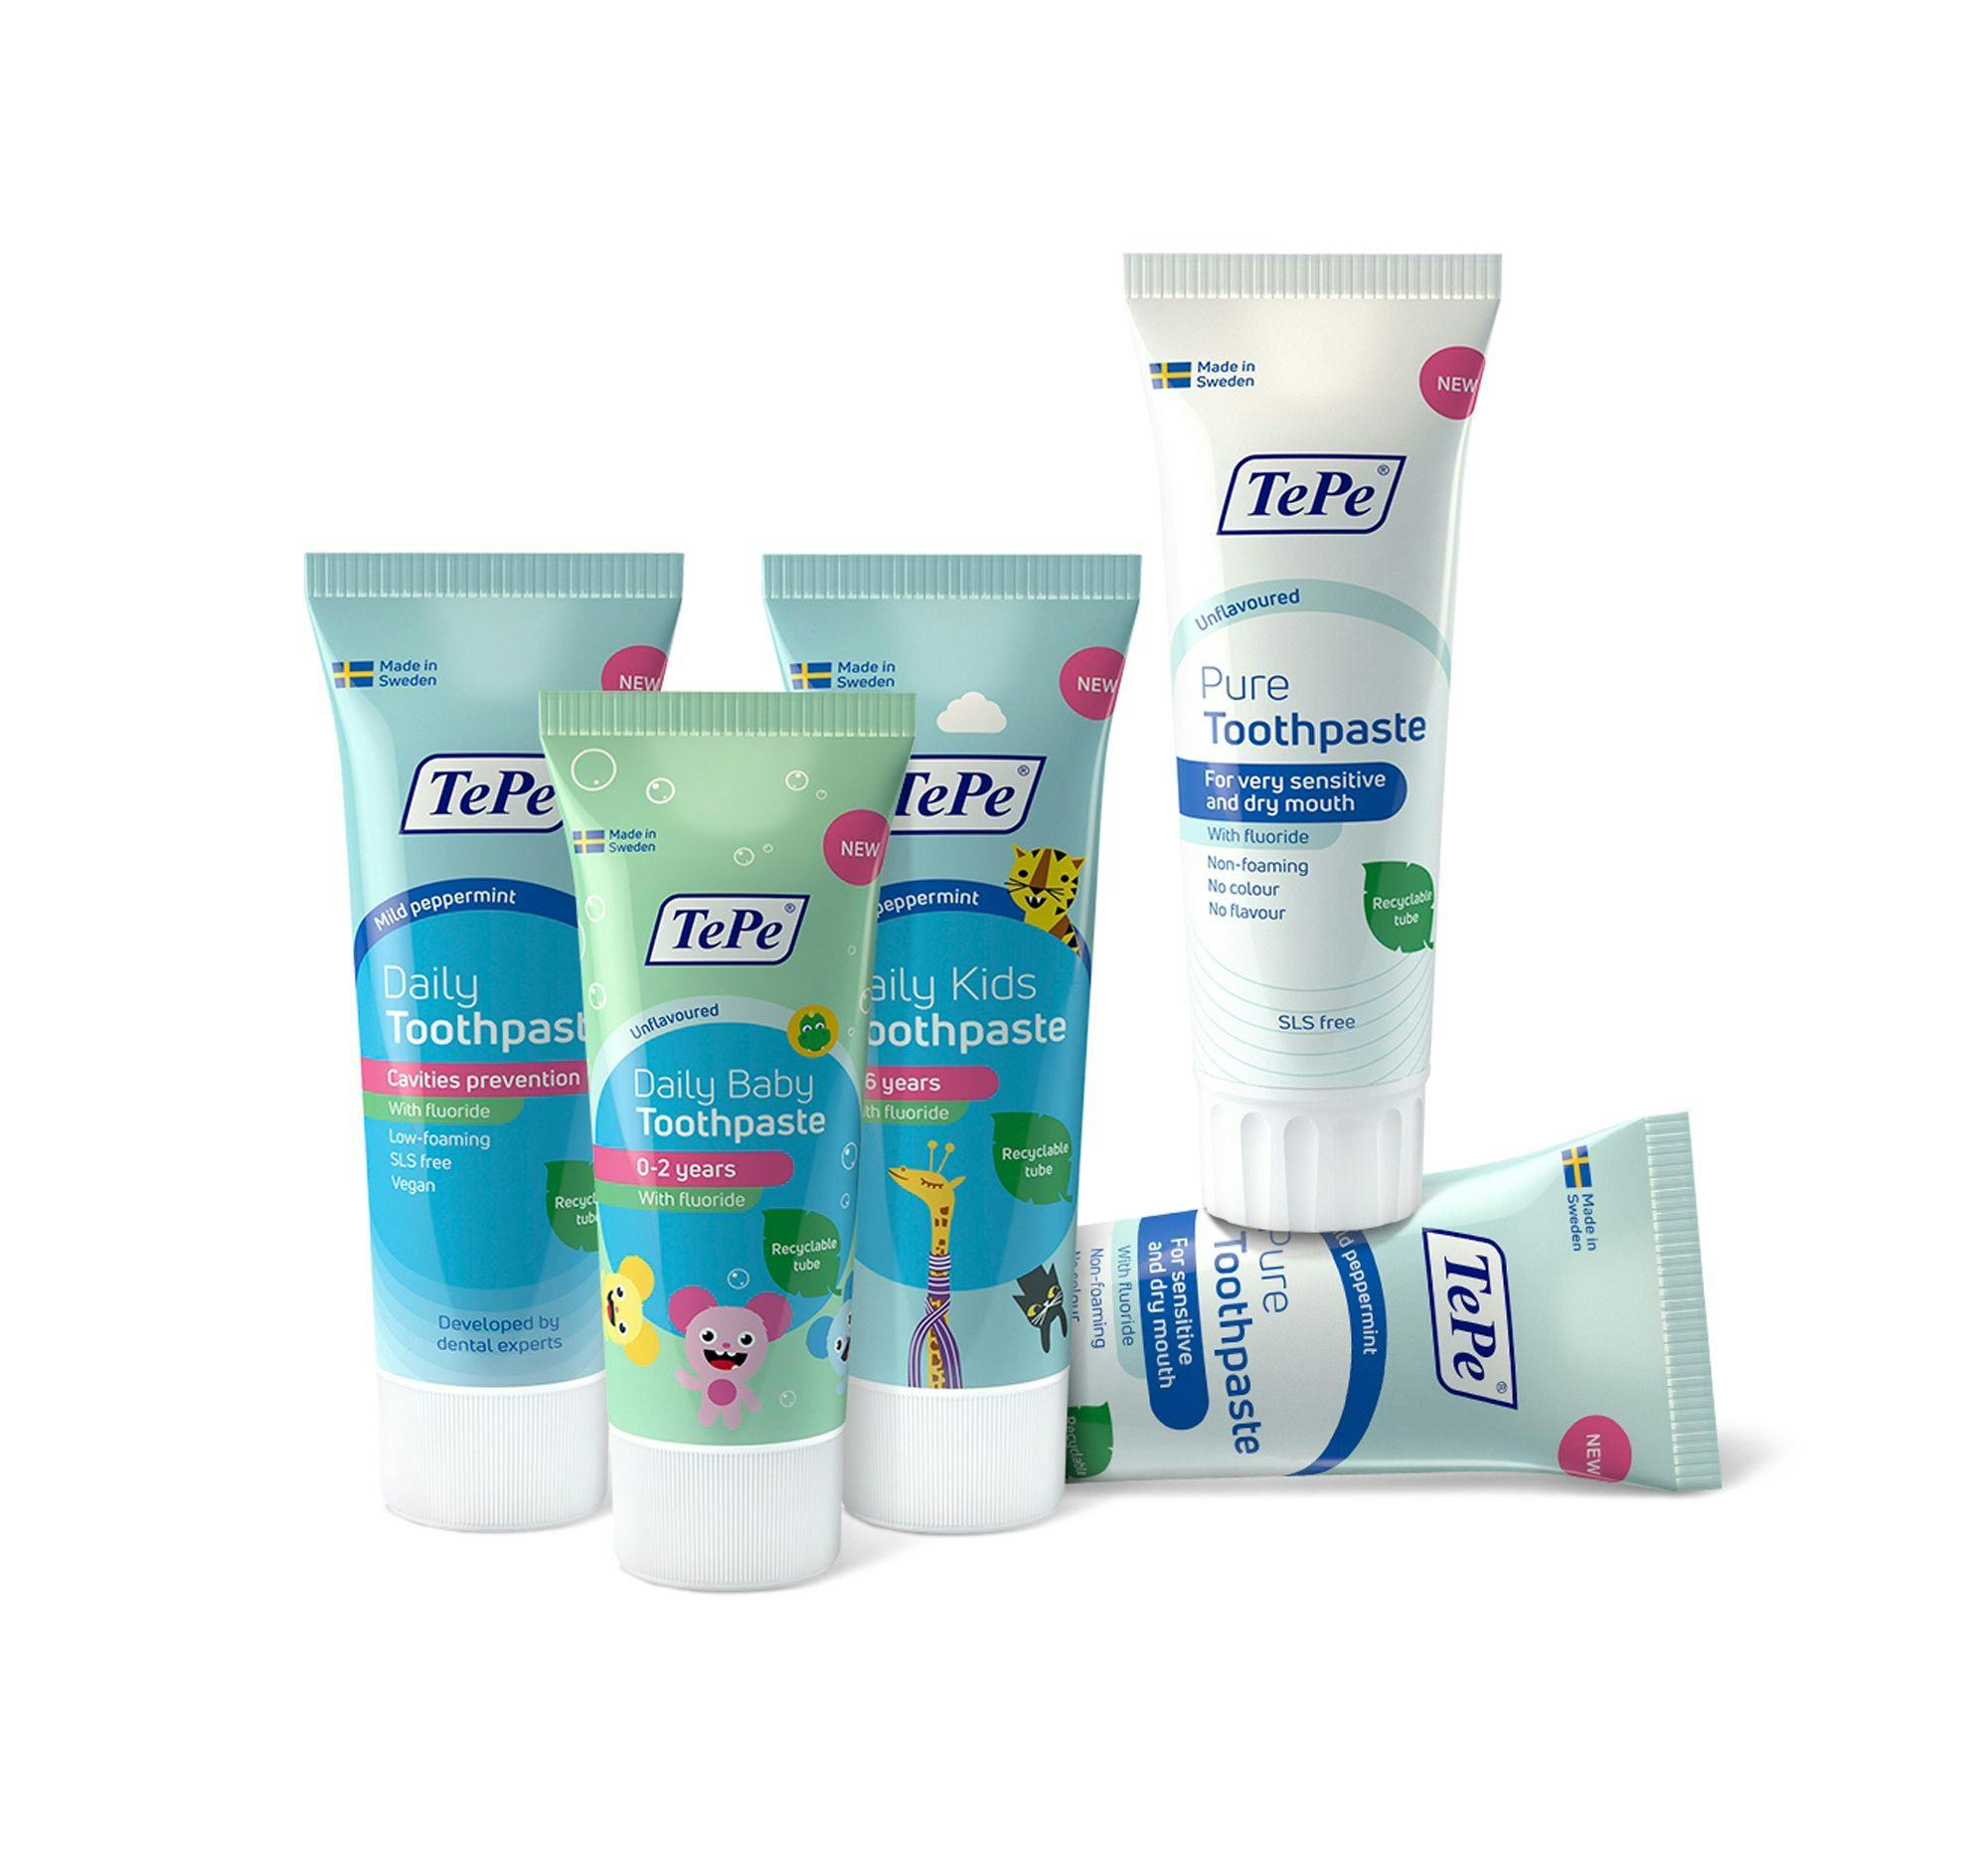 TePe Launches New Toothpaste Range for Different Oral Care Needs | Image Credit: © TePe